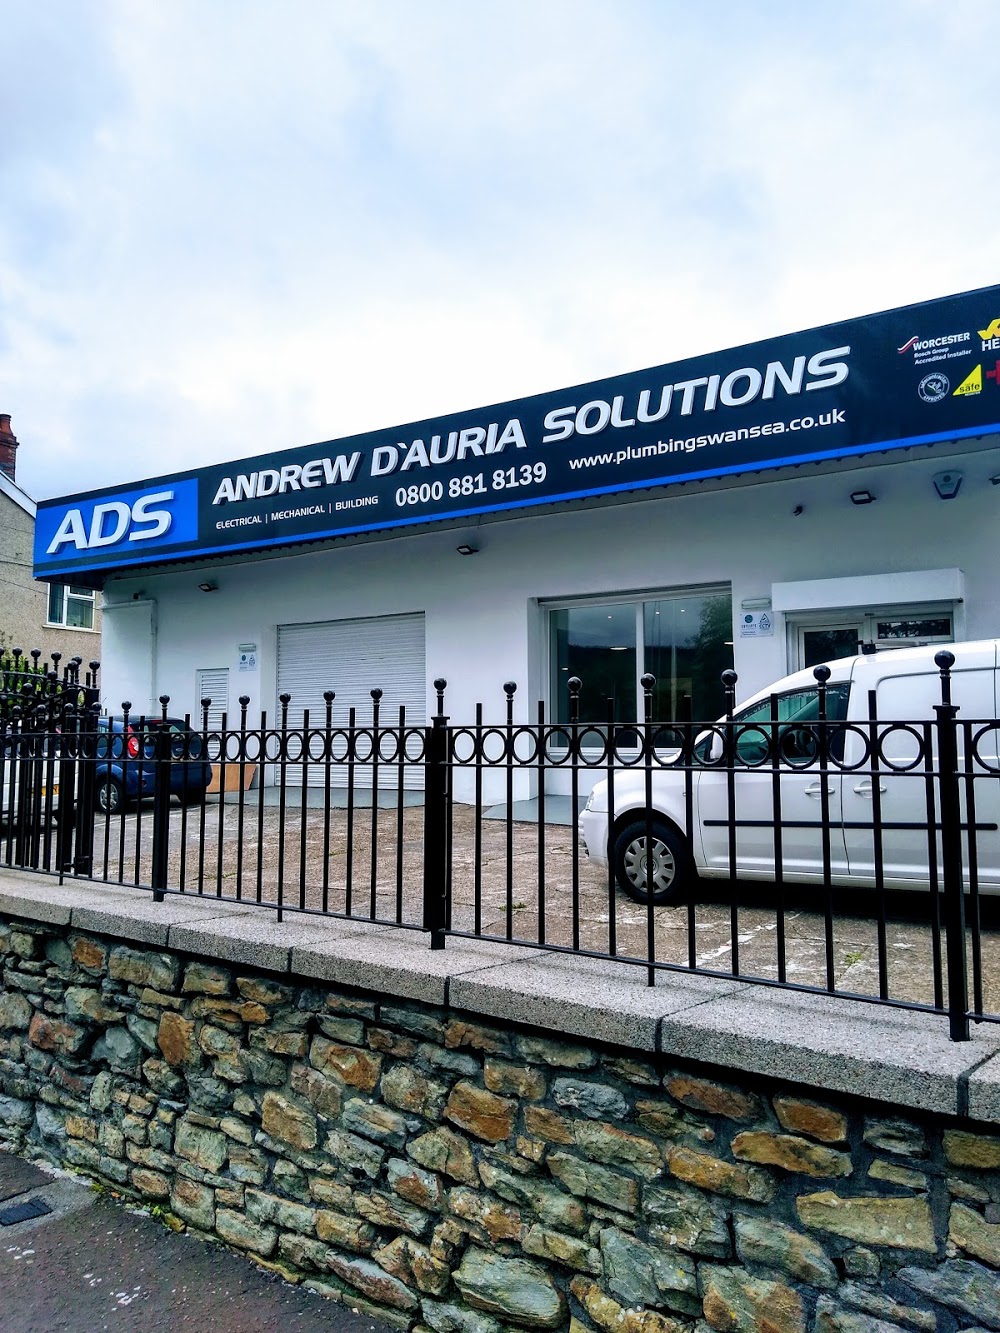 Andrew D’Auria Solutions